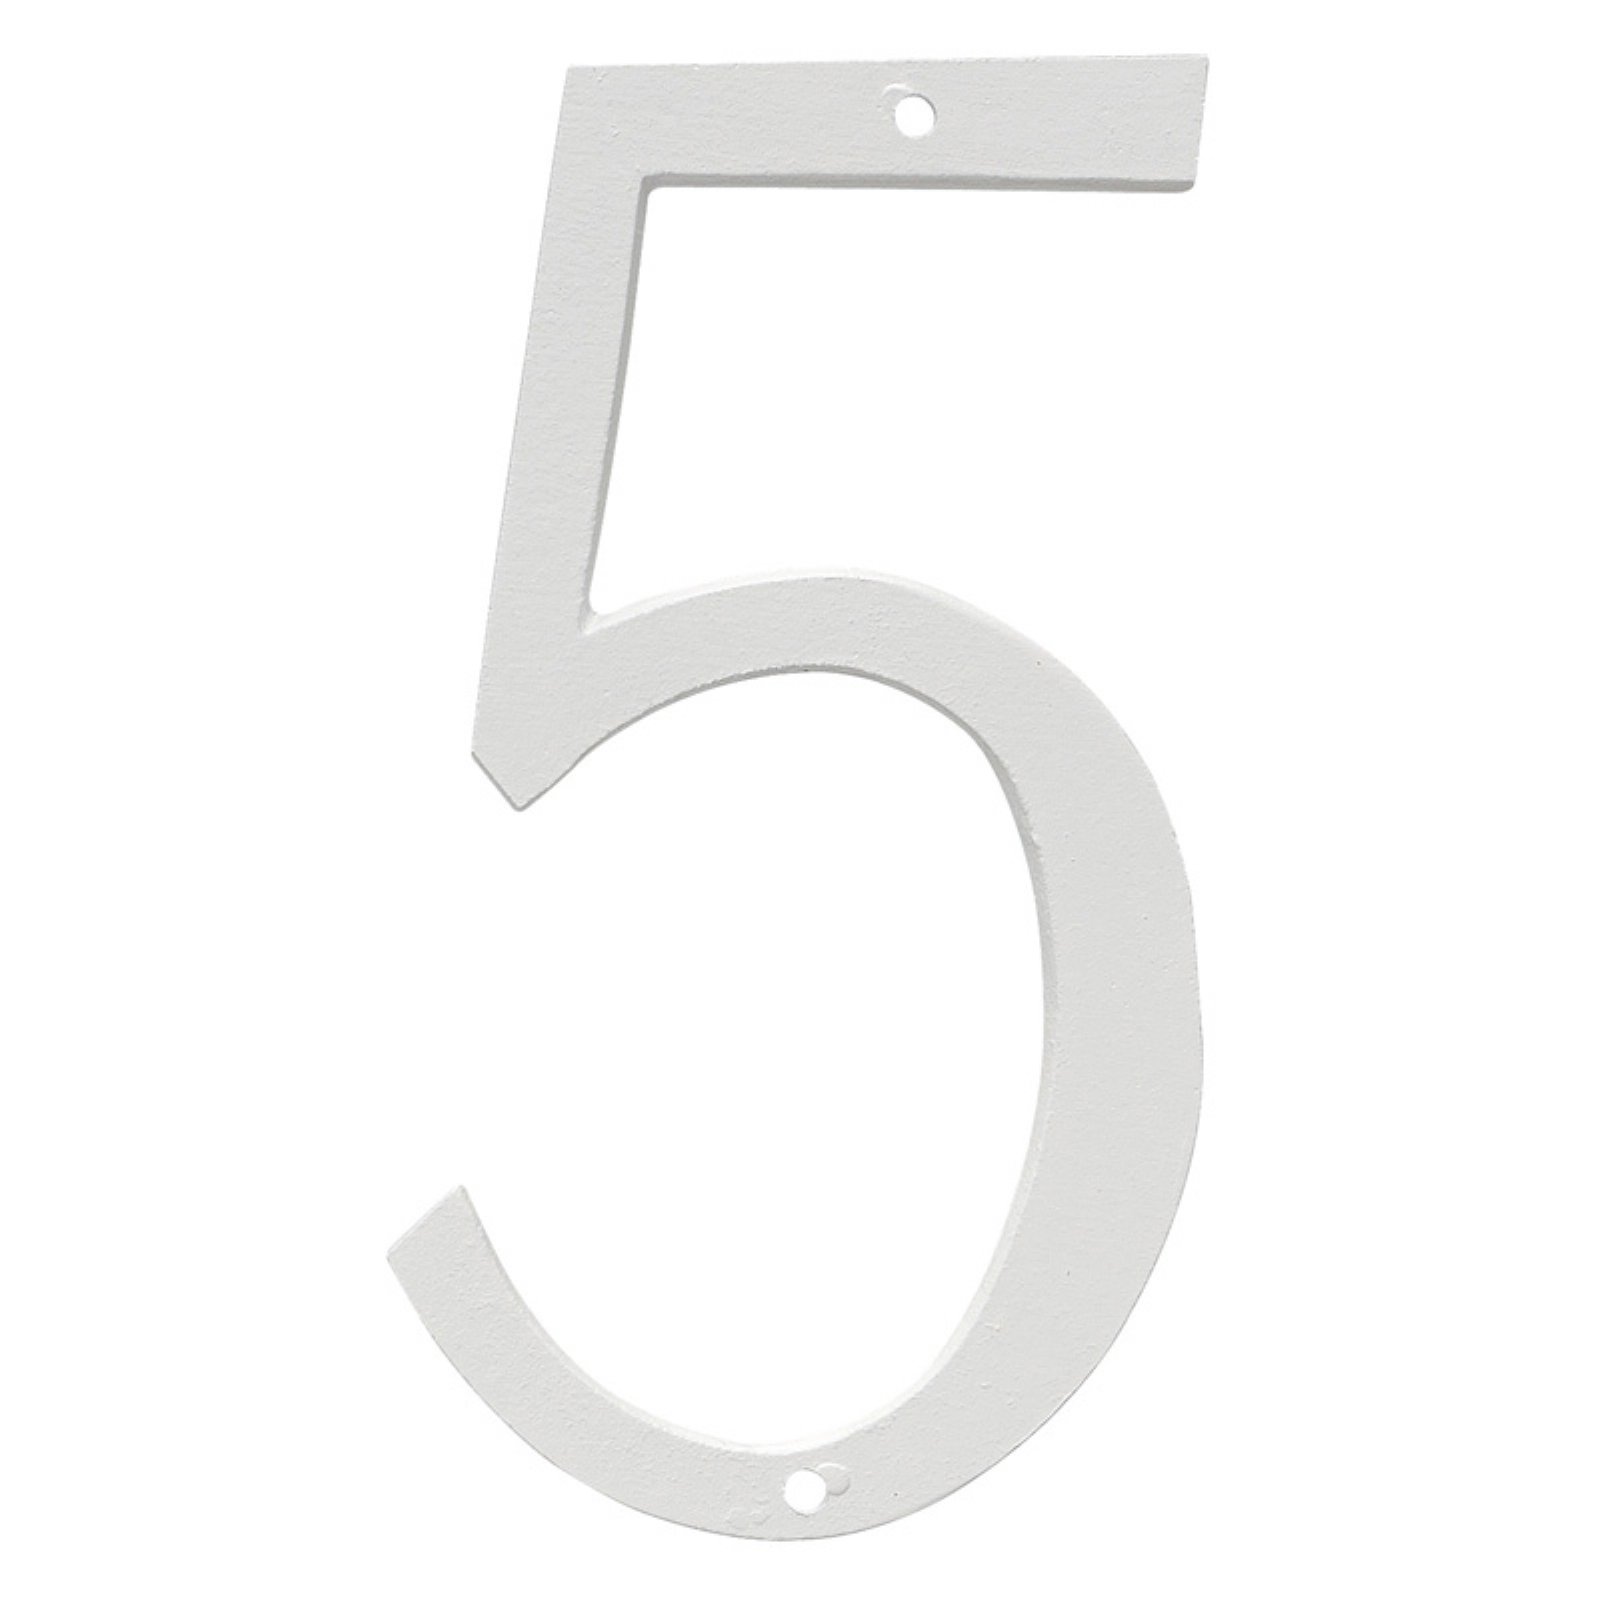 Montague Metal Products CSHN-6-6 6 In. Standard Modern Font Individual House Number 6 - image 5 of 11